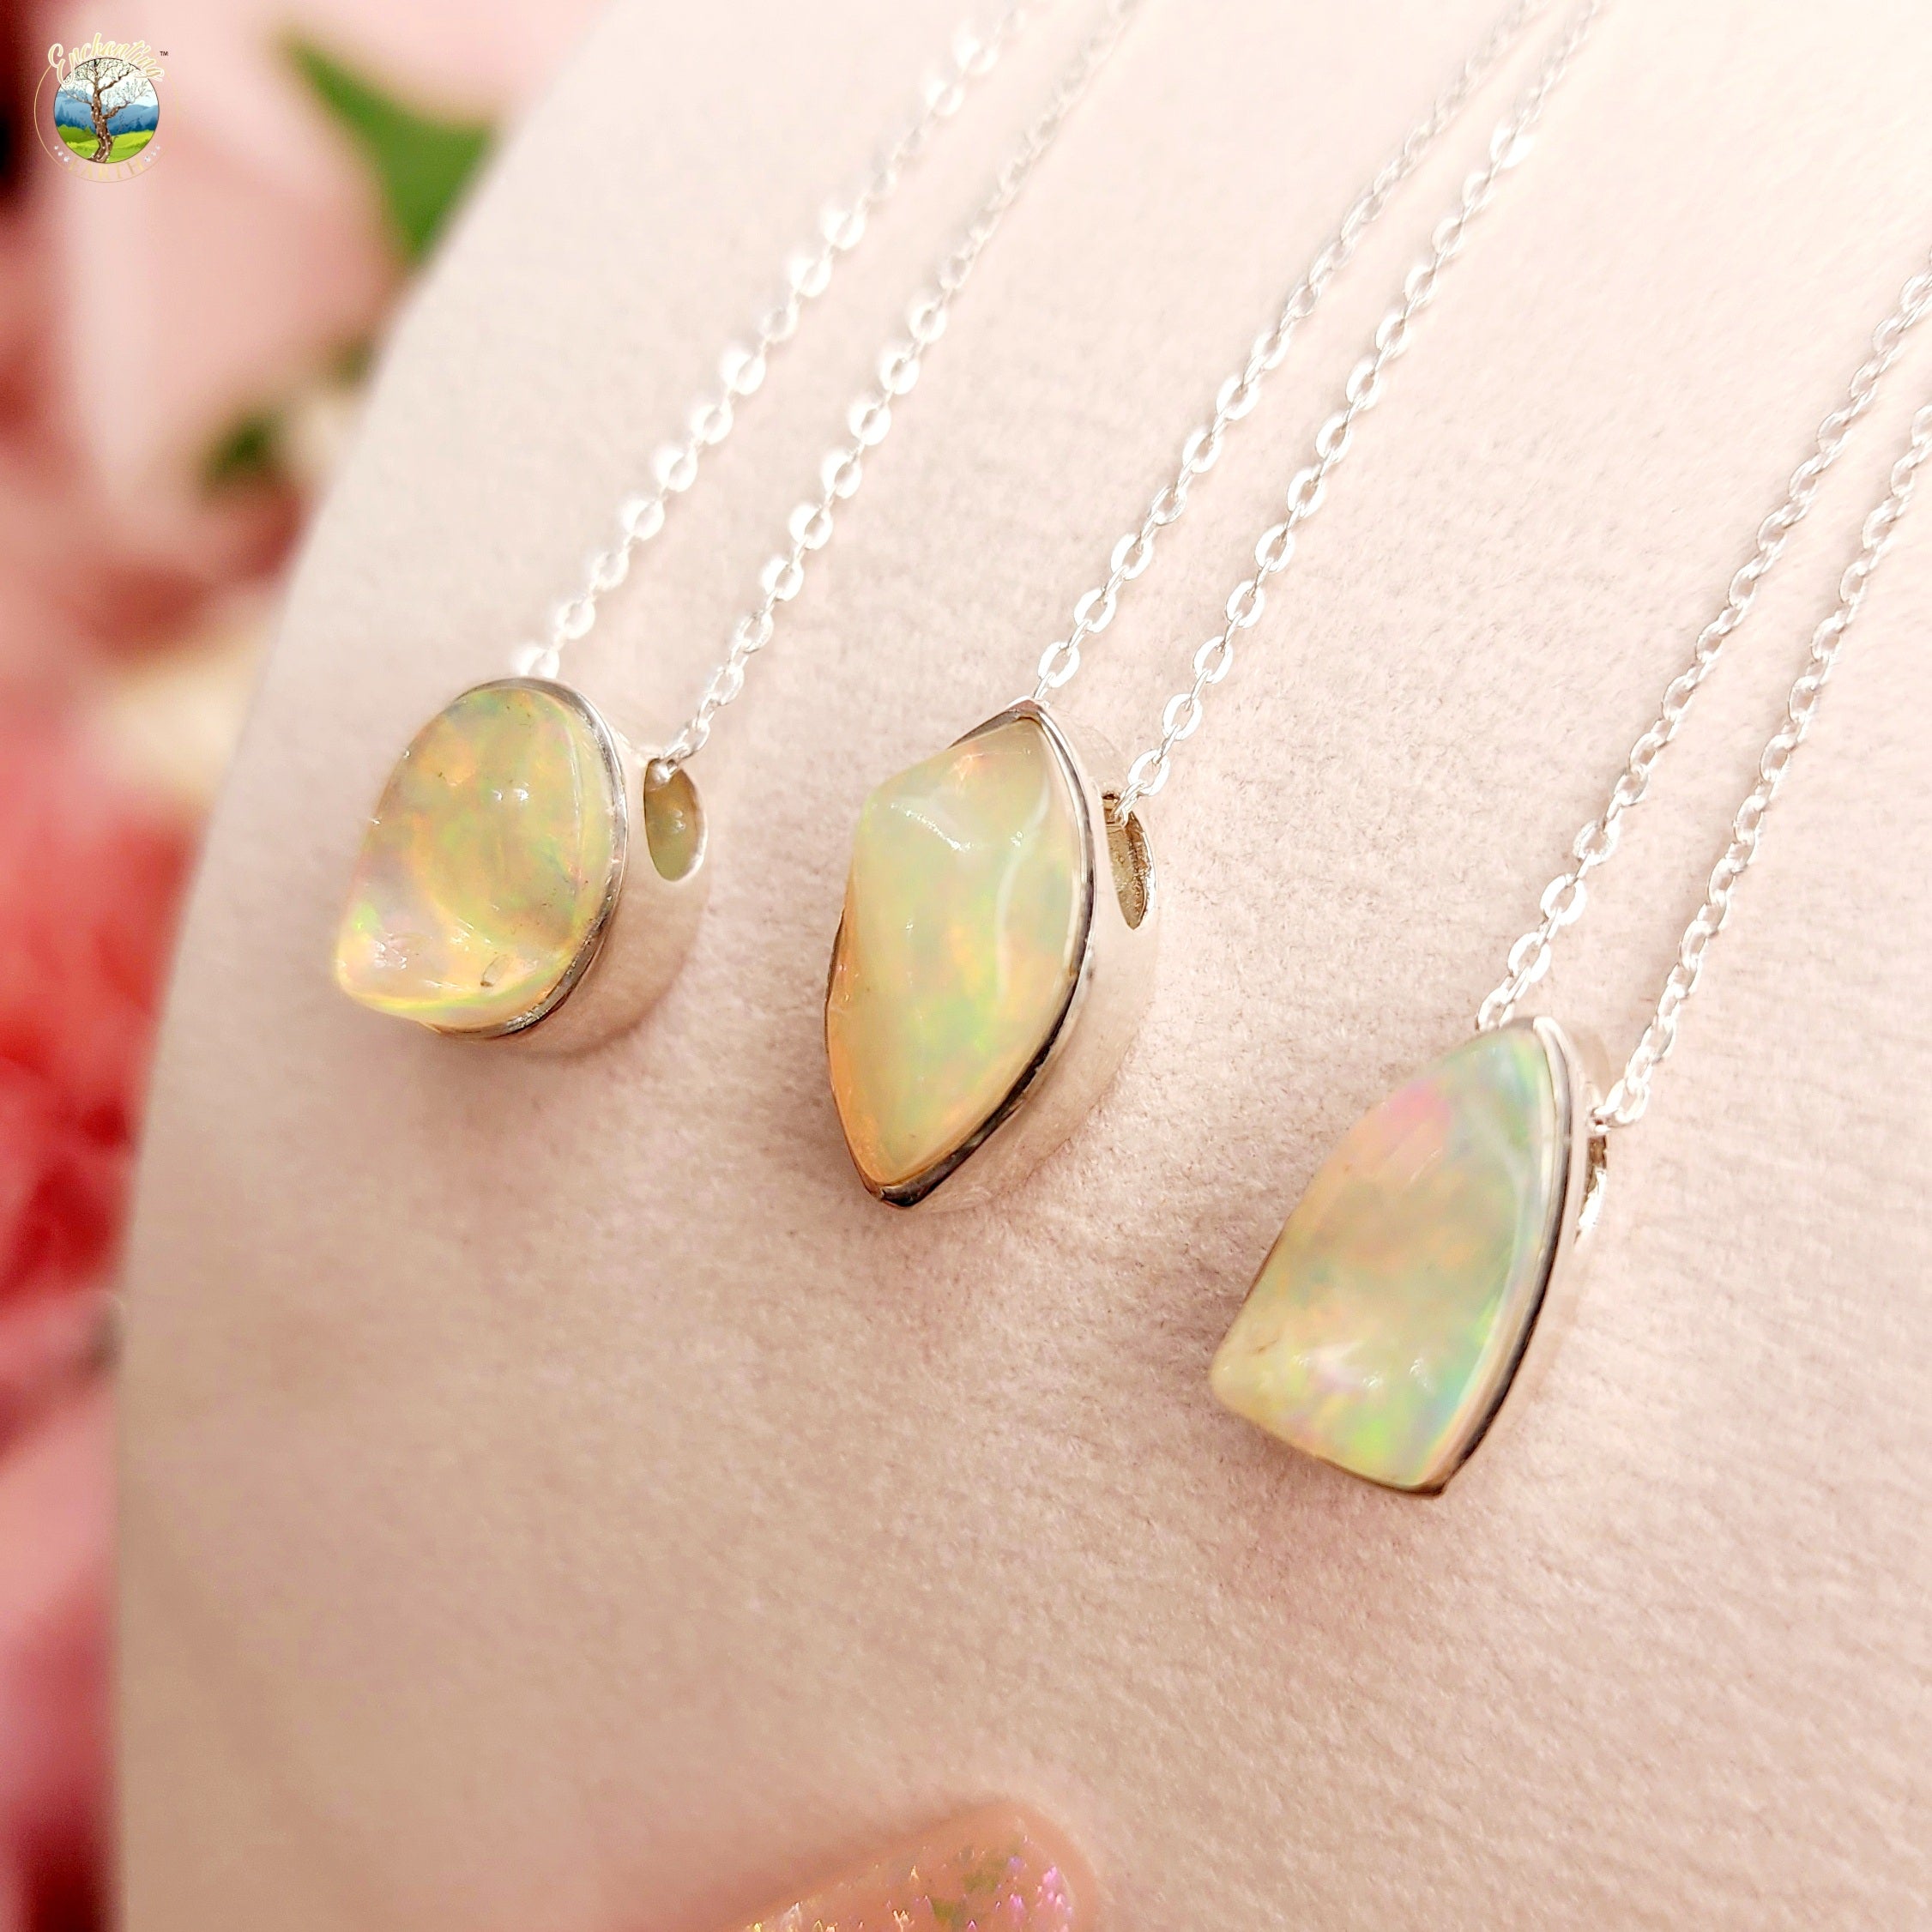 Ethiopian Opal Raw Necklace .925 Silver for Creativity, Joy and Self Discovery